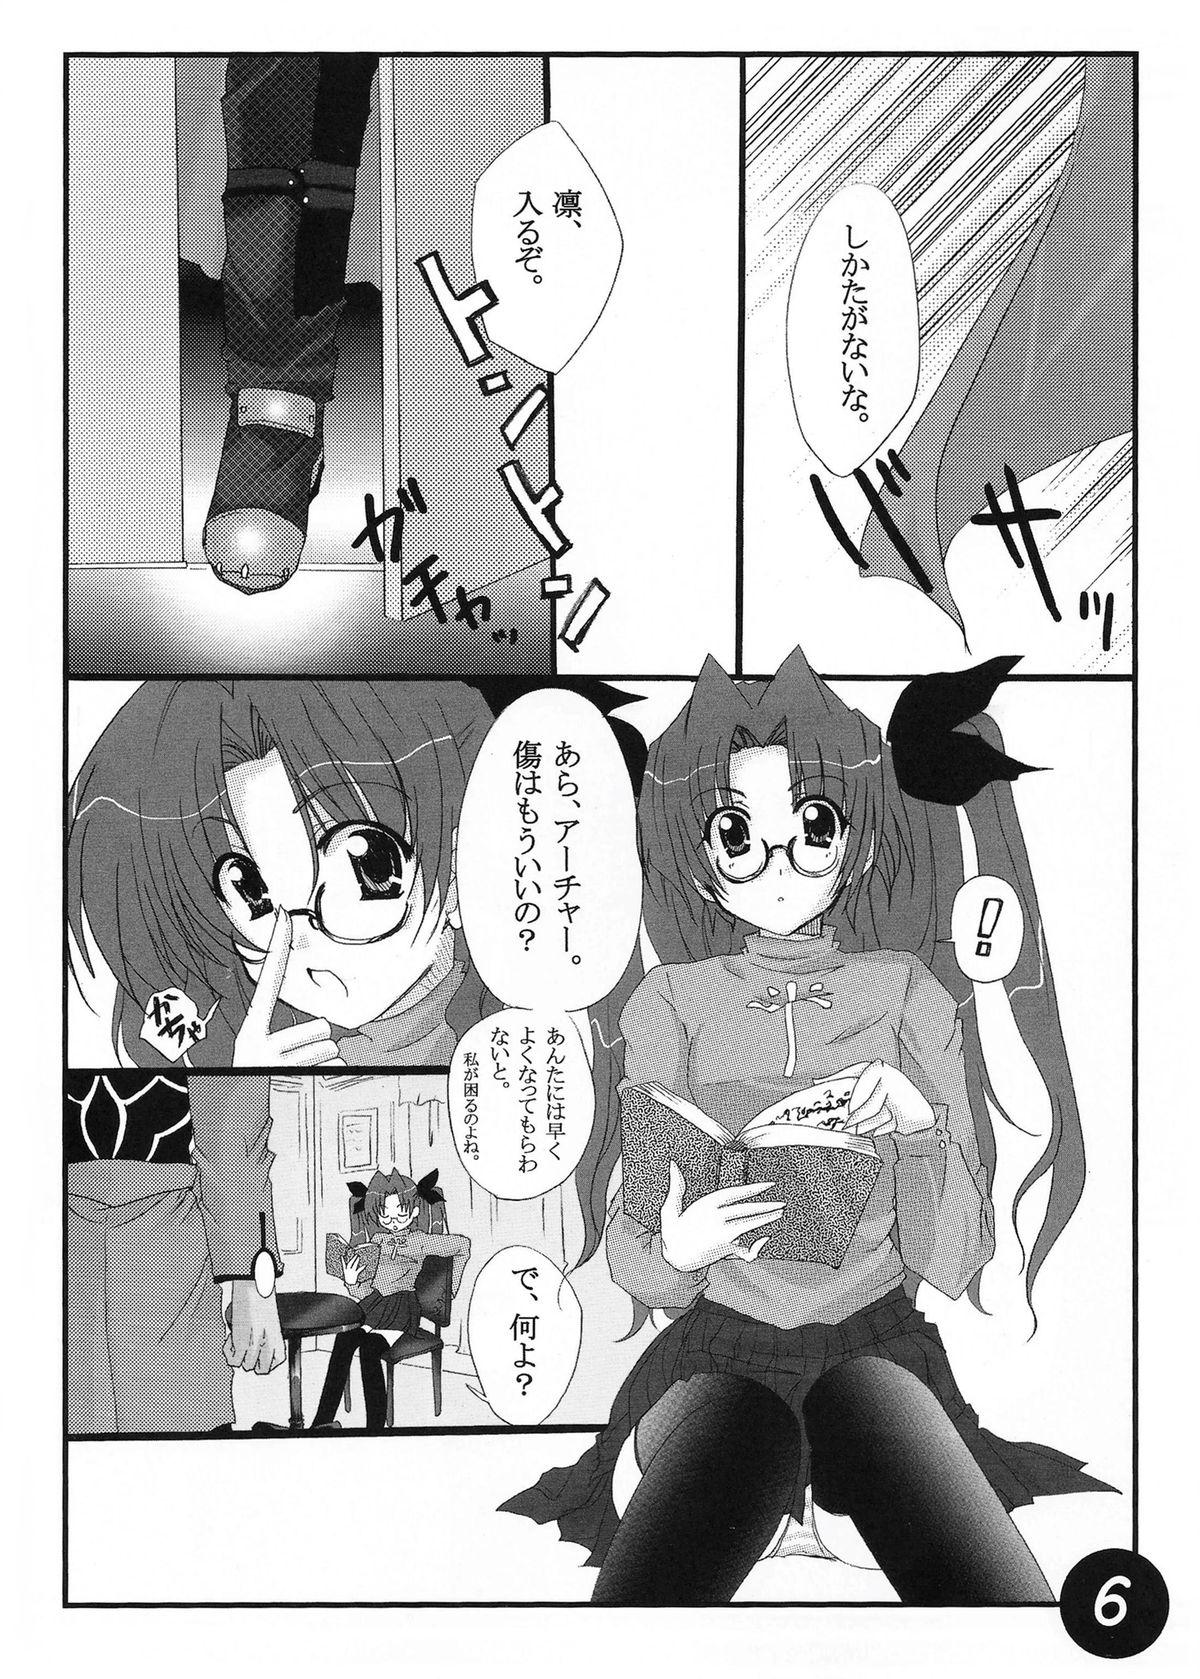 Leather CATHARSIS - Fate stay night Amateur Pussy - Page 4